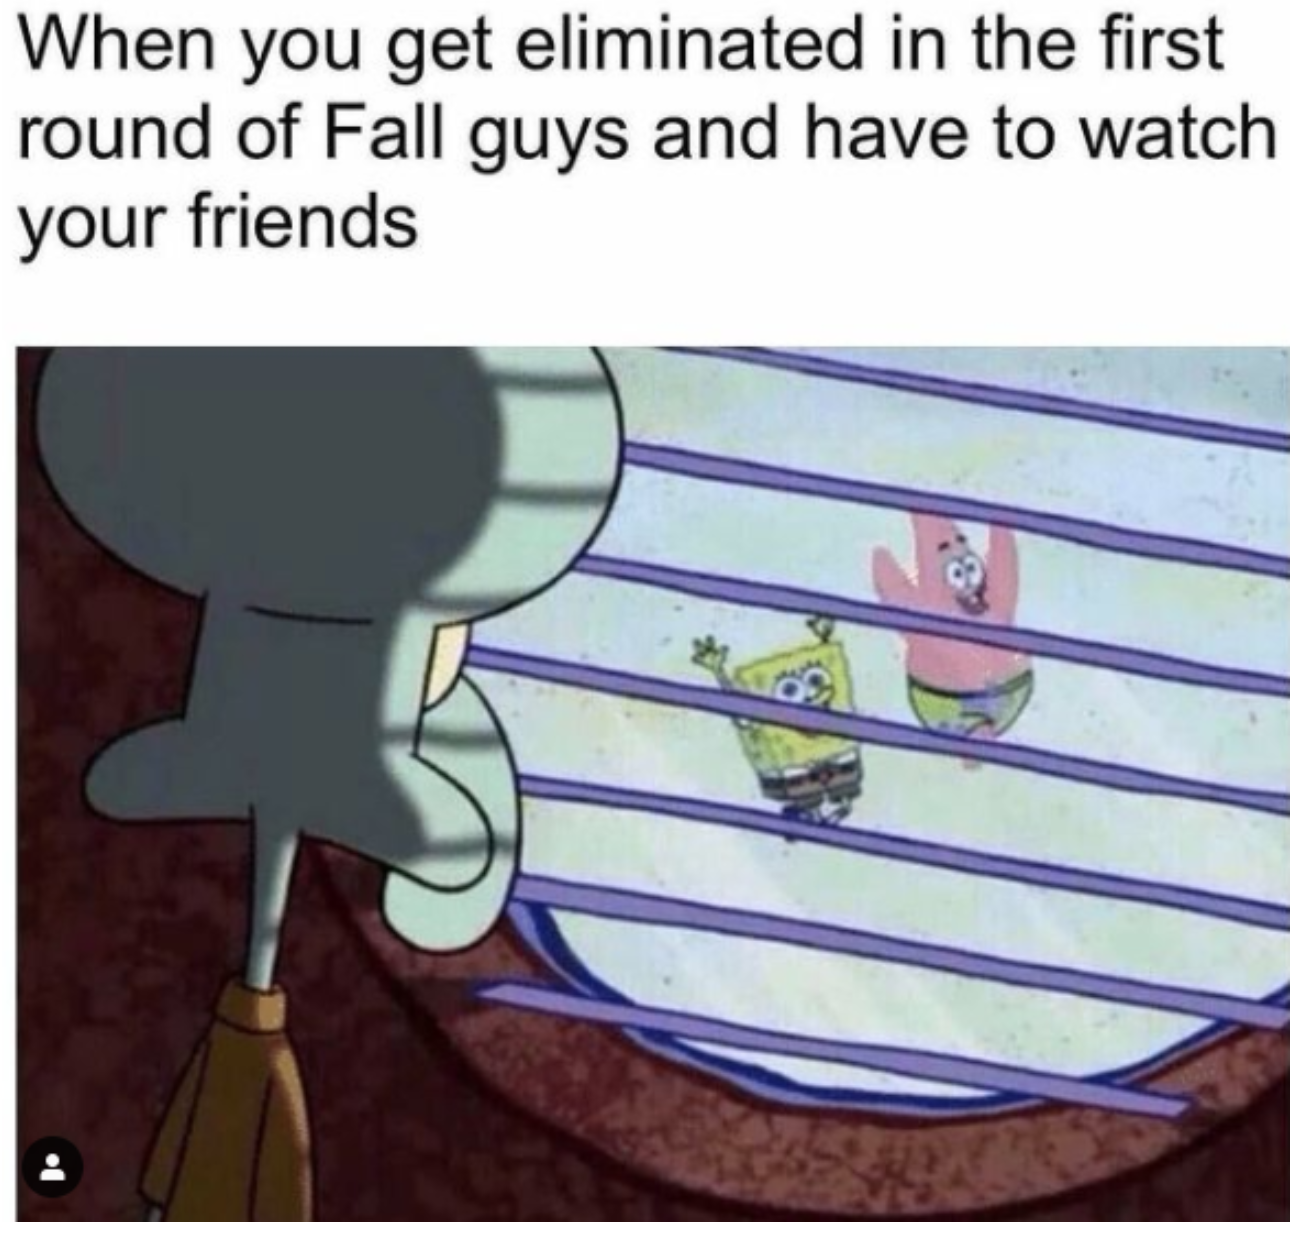 funny gaming memes - squidward looking out the window meme - When you get eliminated in the first round of Fall guys and have to watch your friends 48! of